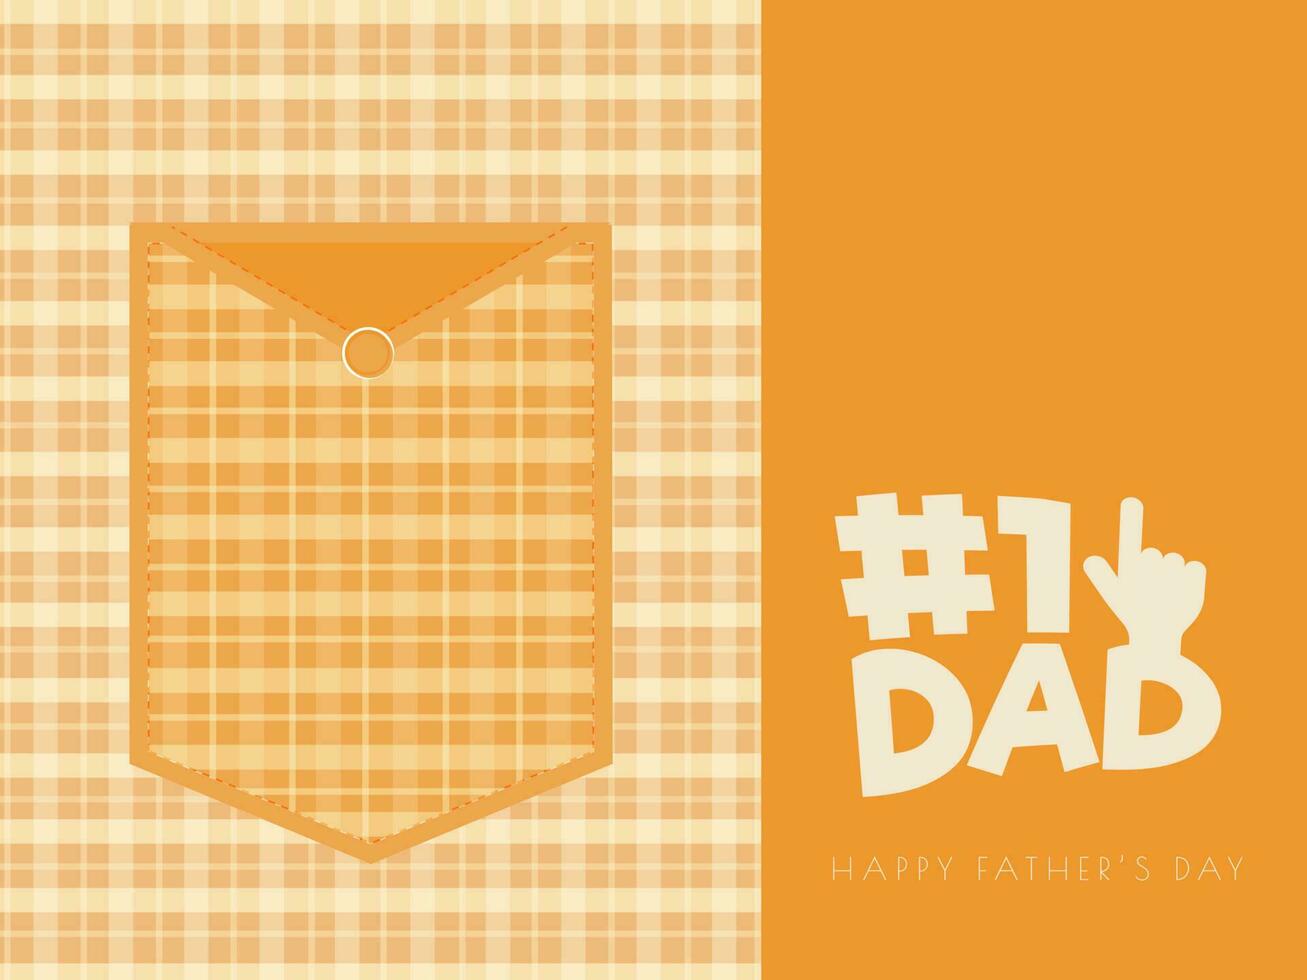 Happy Father's Day Greeting Card With Patch Pocket On Orange Background. vector